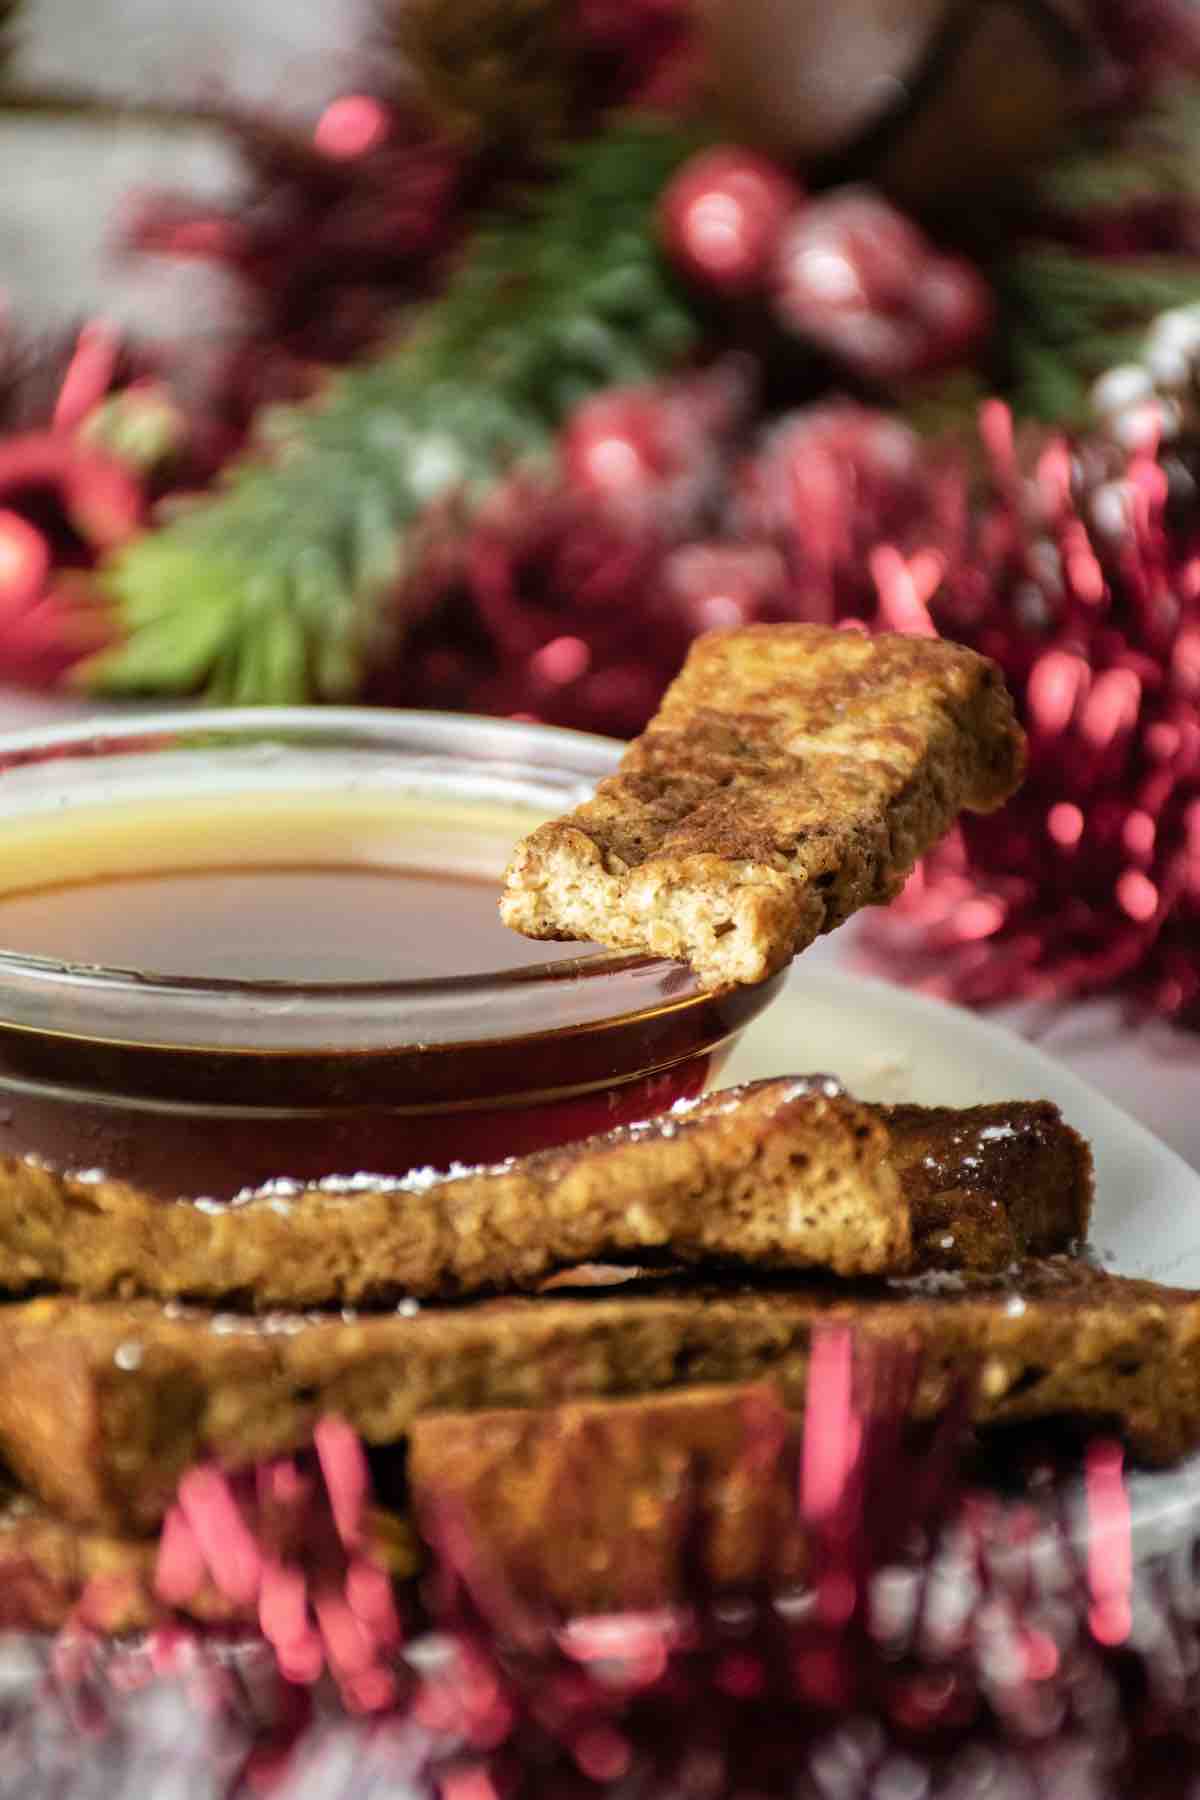 Cognac French toast sticks are perfect for Christmas morning breakfast.